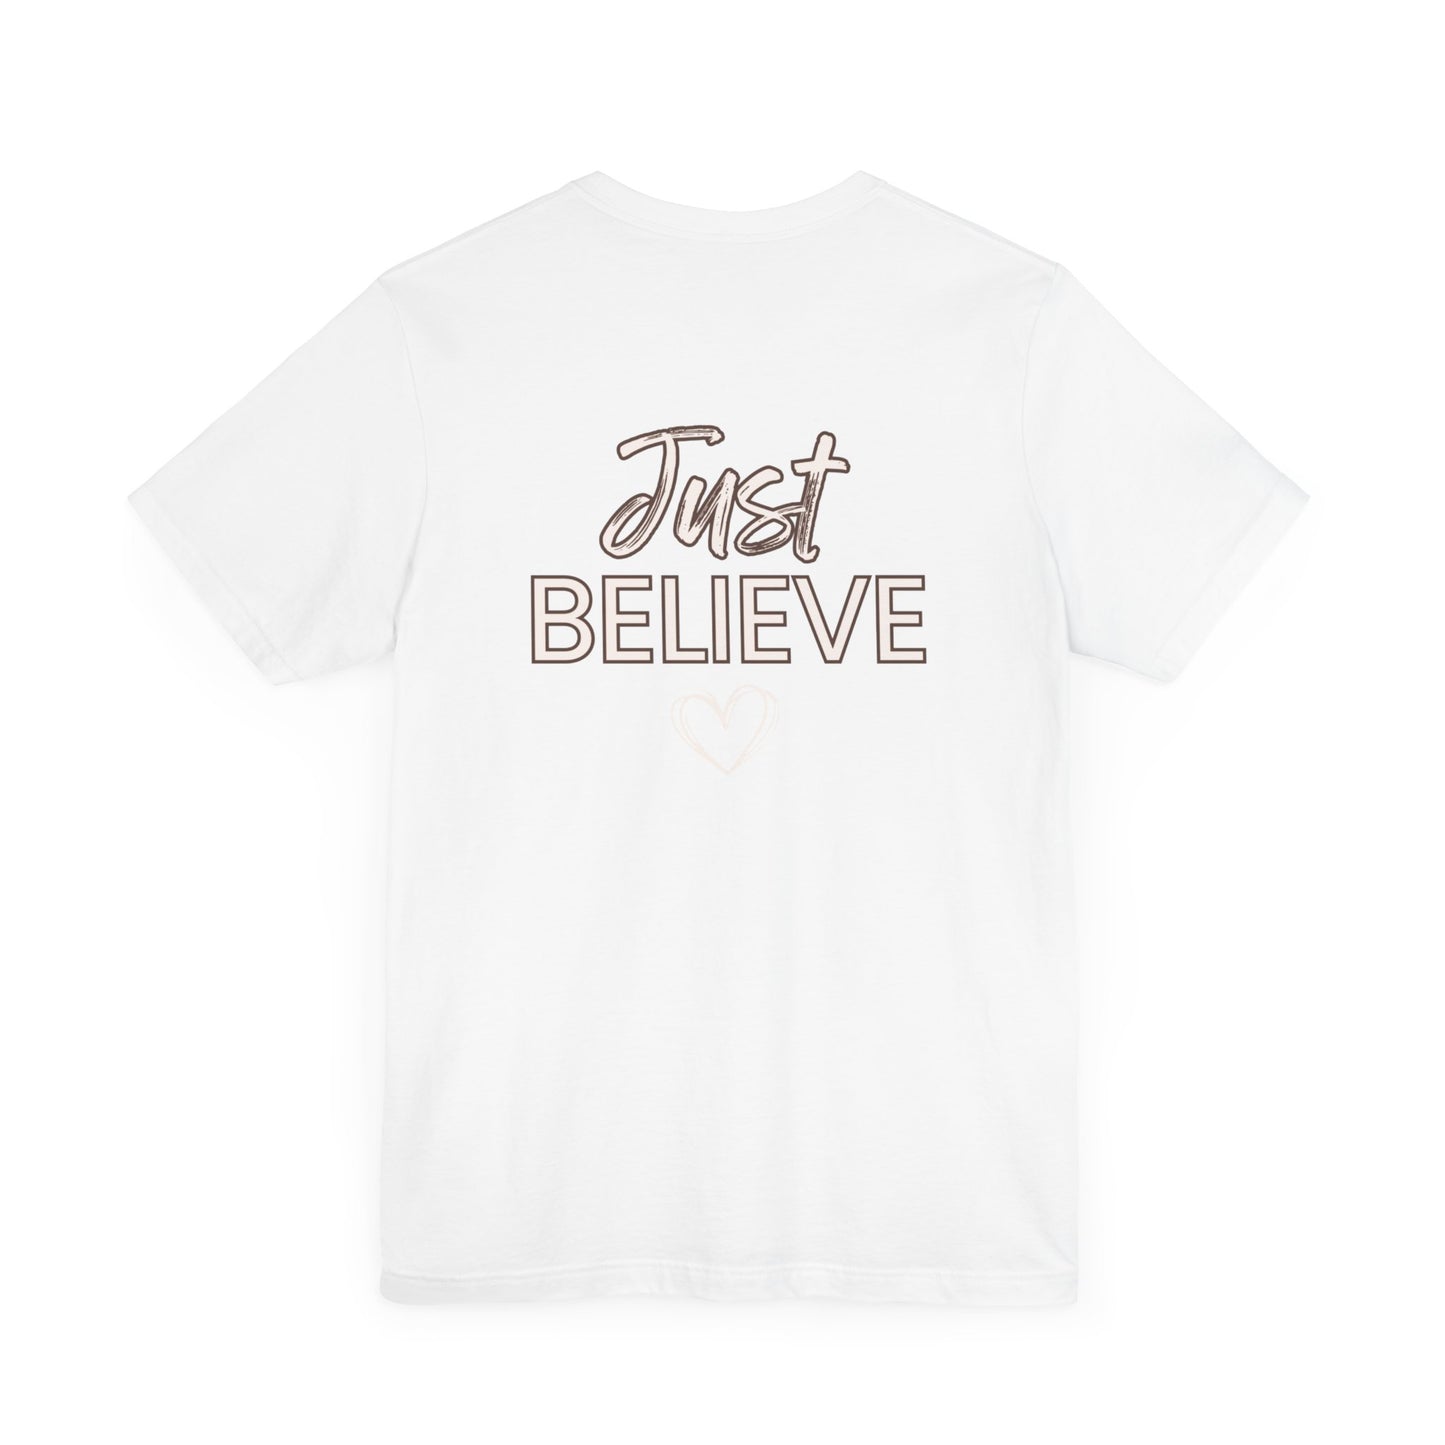 Bella+Canvas Unisex Jersey Short Sleeve Tee "Your Enough with Jesus - Just Believe"